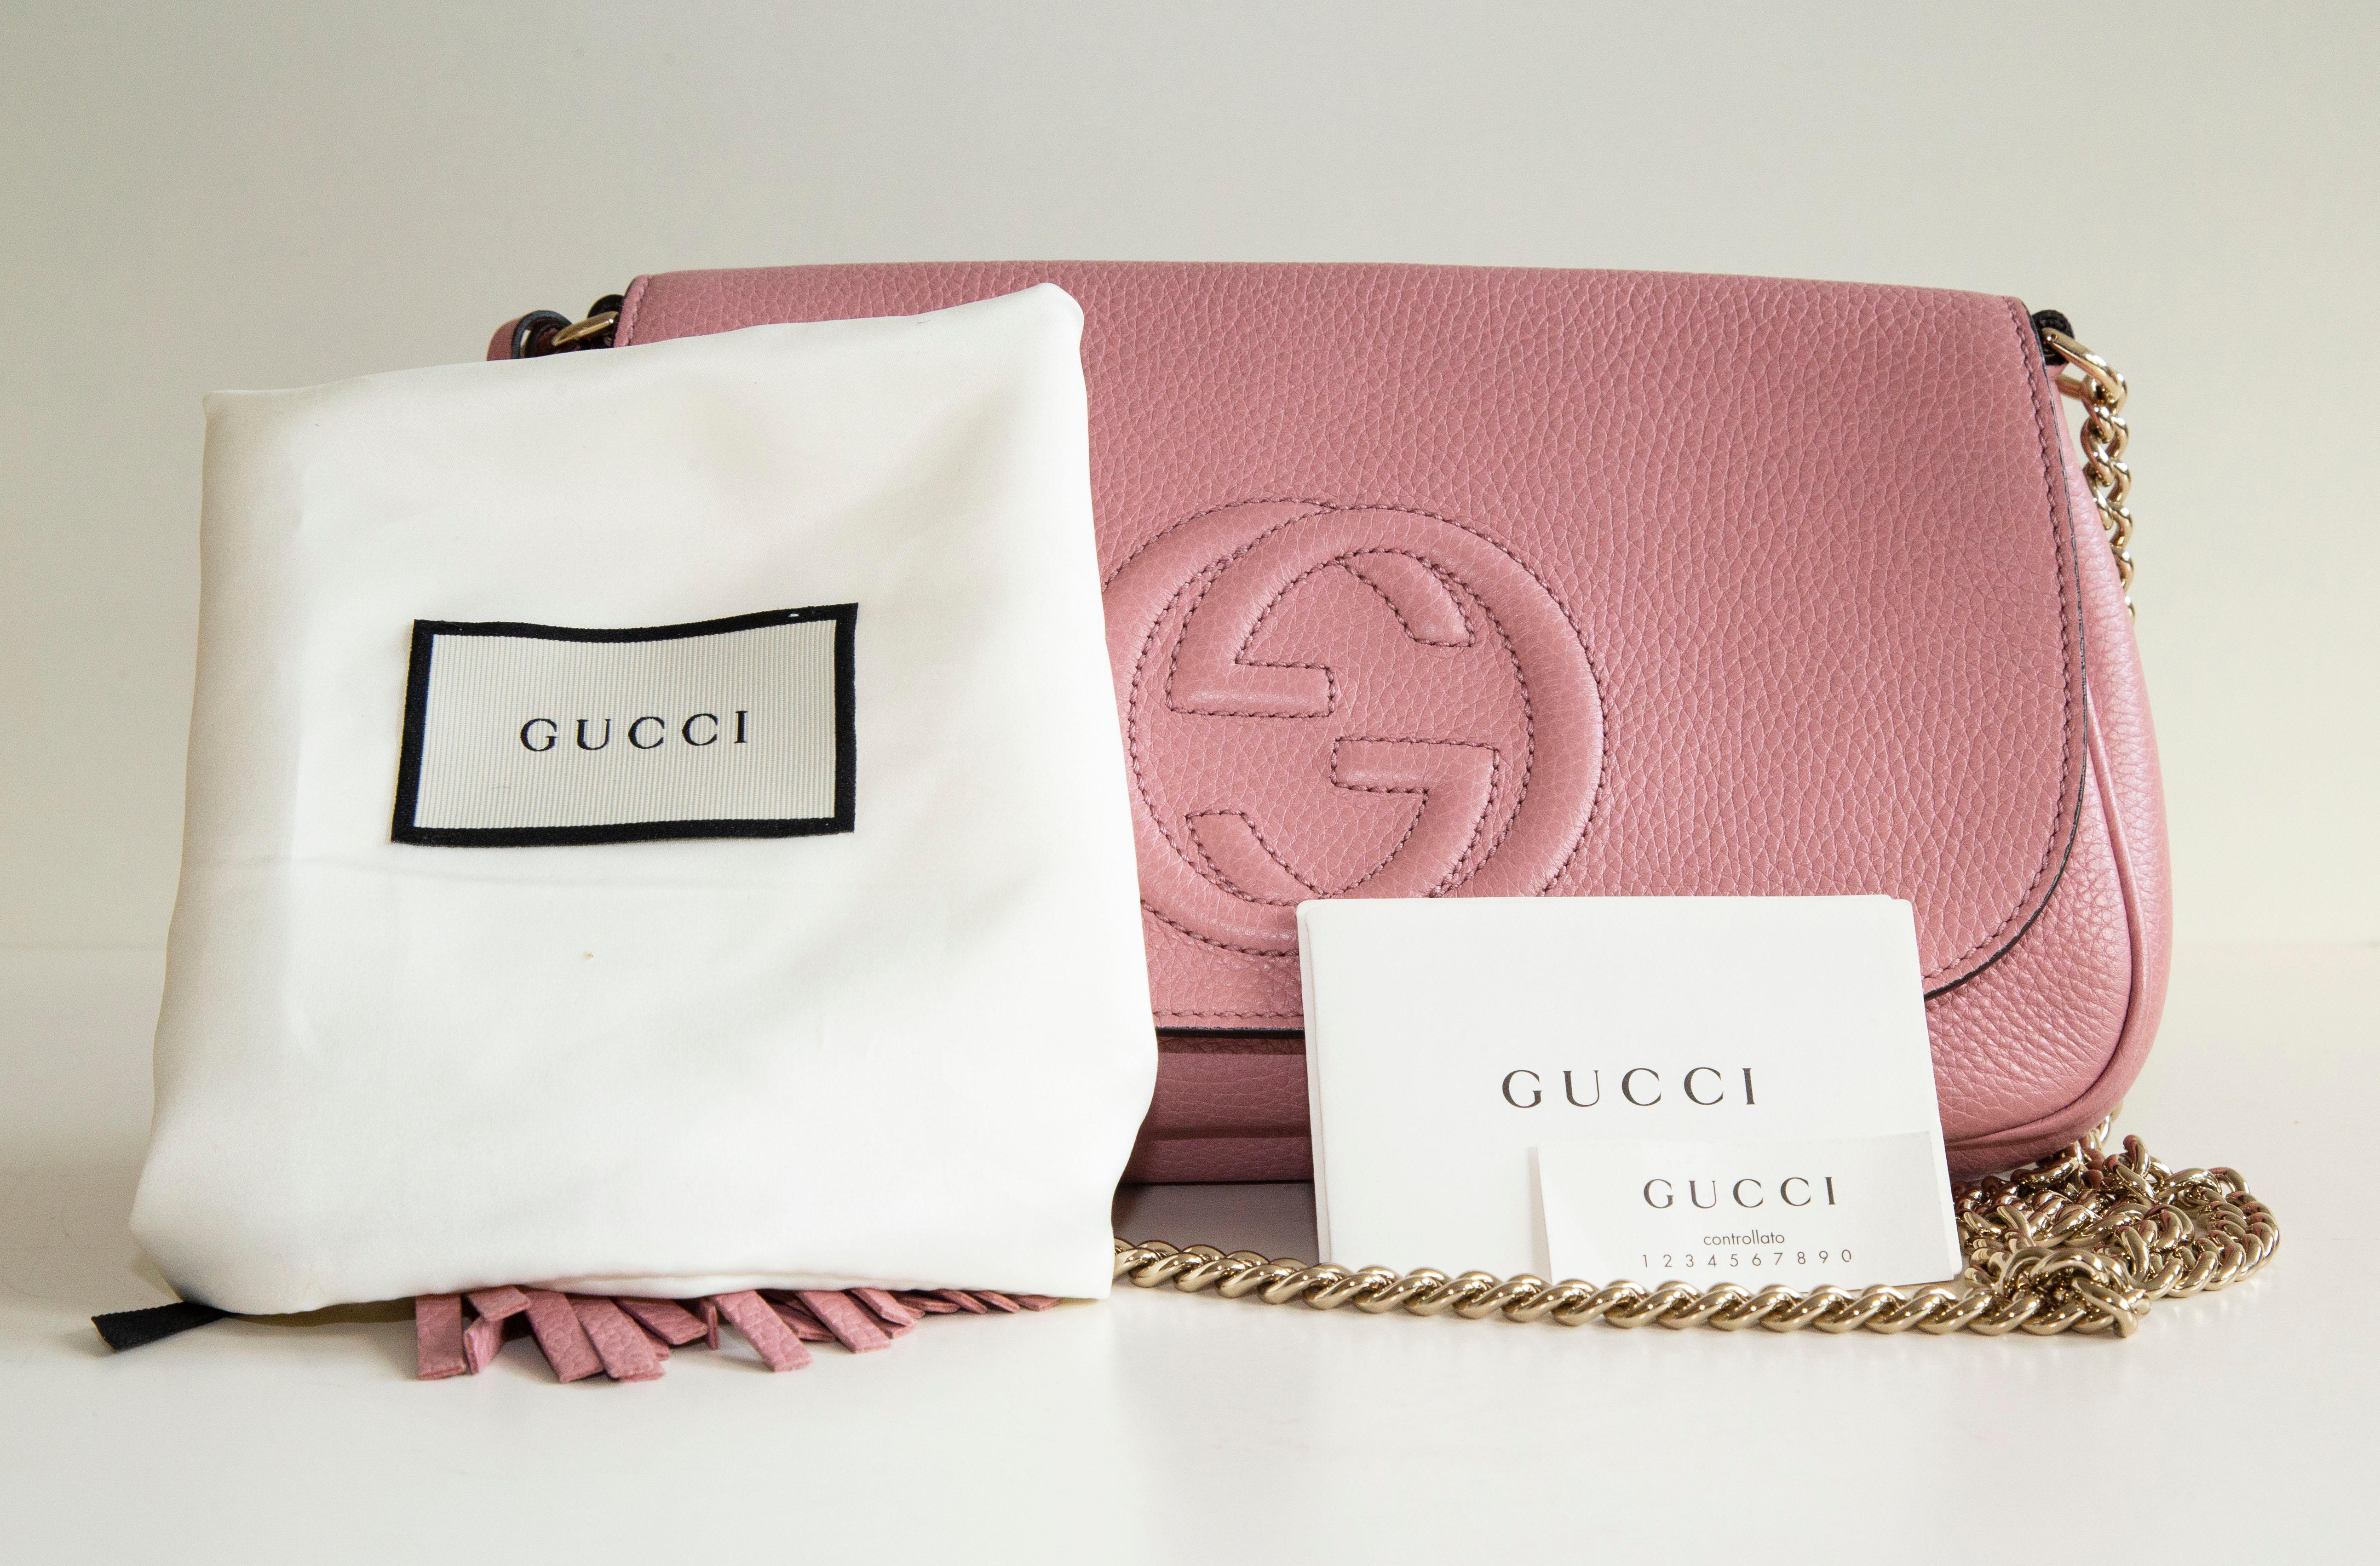 Gucci Soho Pink Leather Crossbody Bag For Sale 4